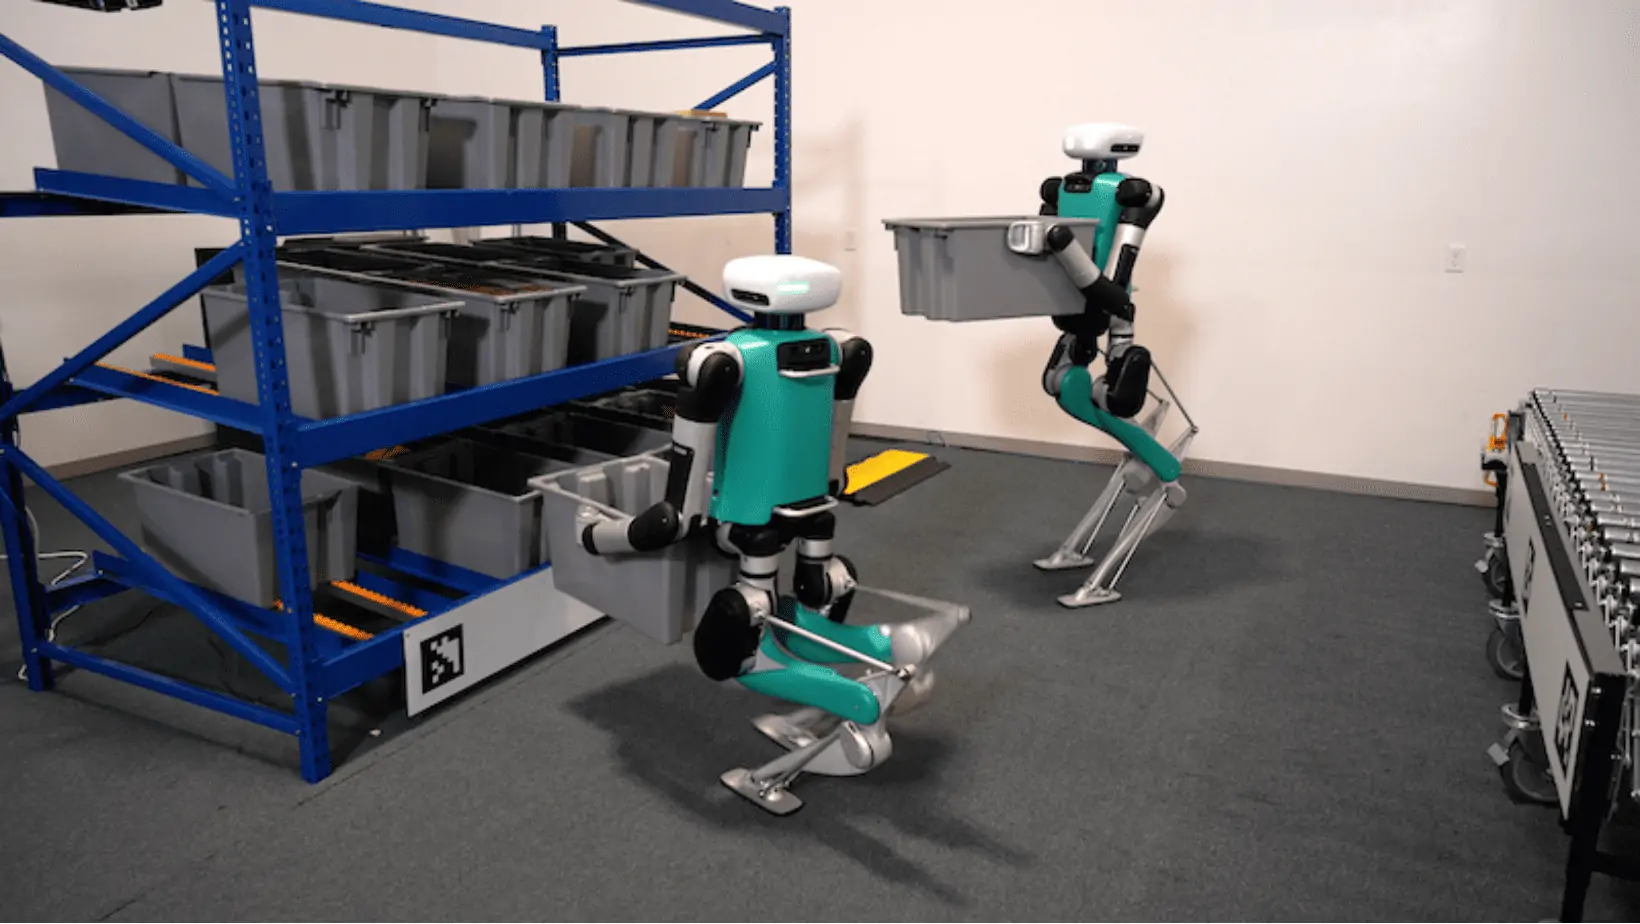 Agility Robotics Names Peggy Johnson as CEO, Pioneering Humanoid Robots in Warehouse Automation